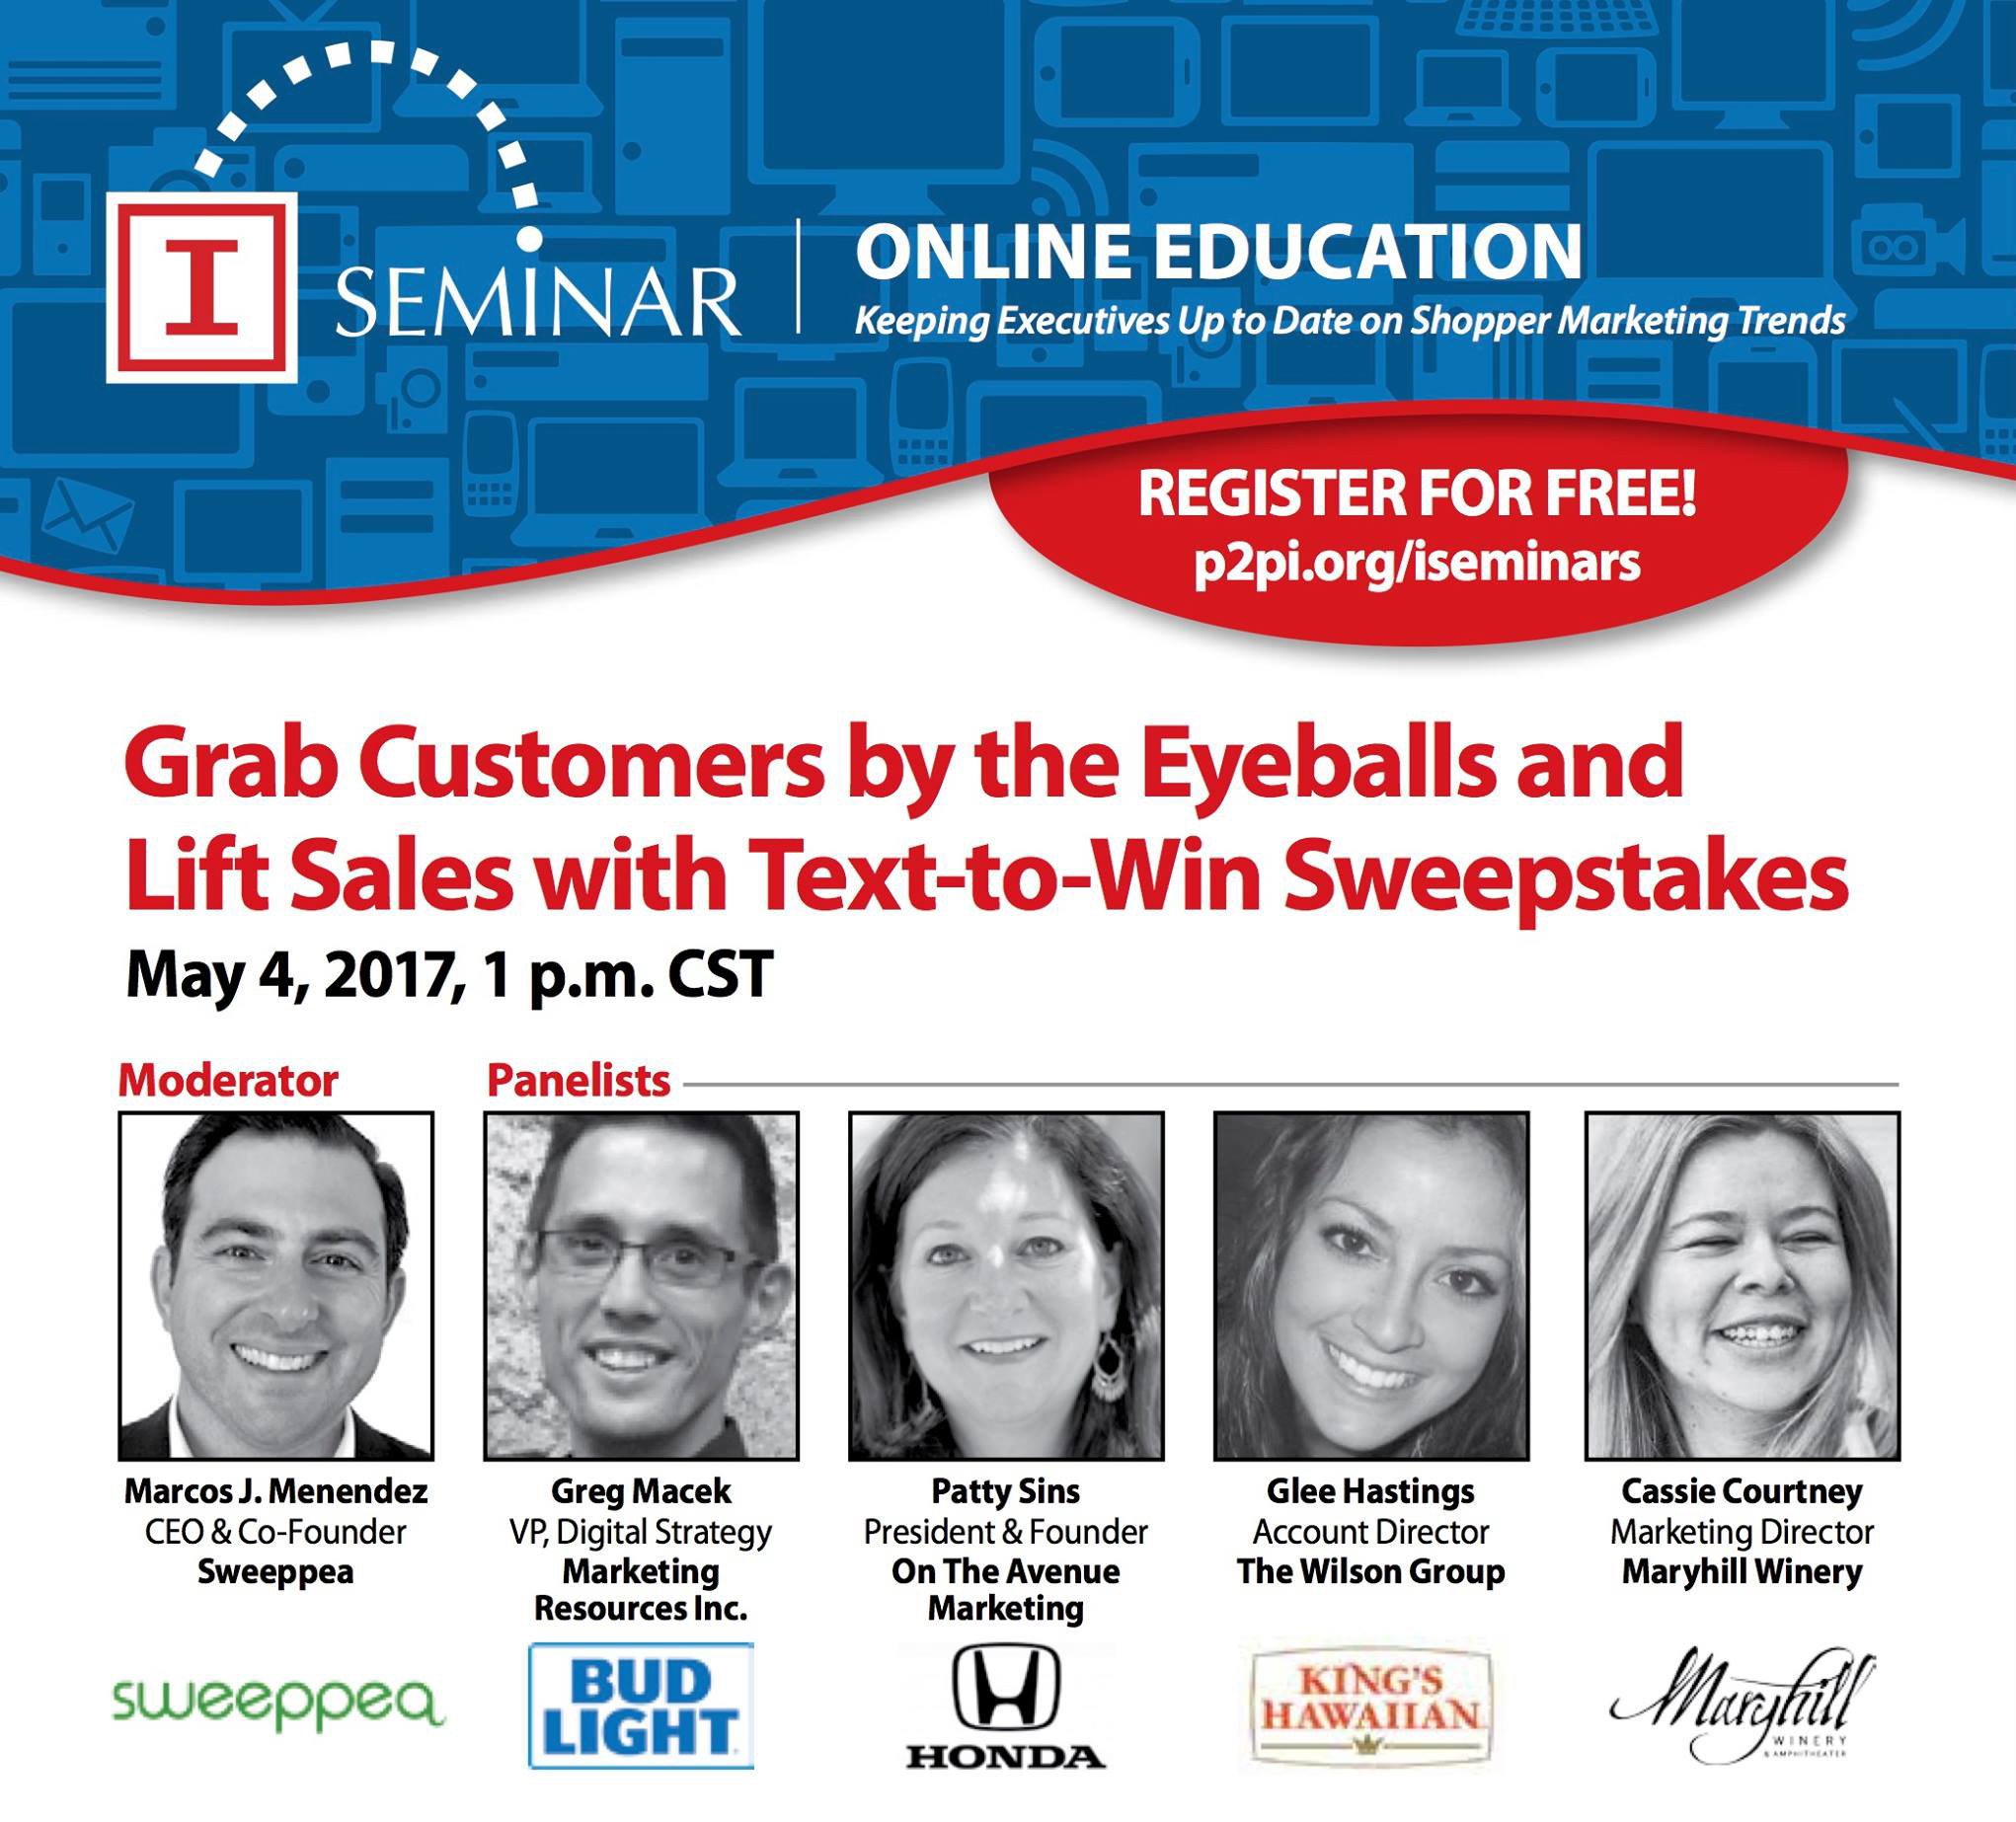 Learn how to grab more customers by the eyeballs with a mobile sweepstakes!